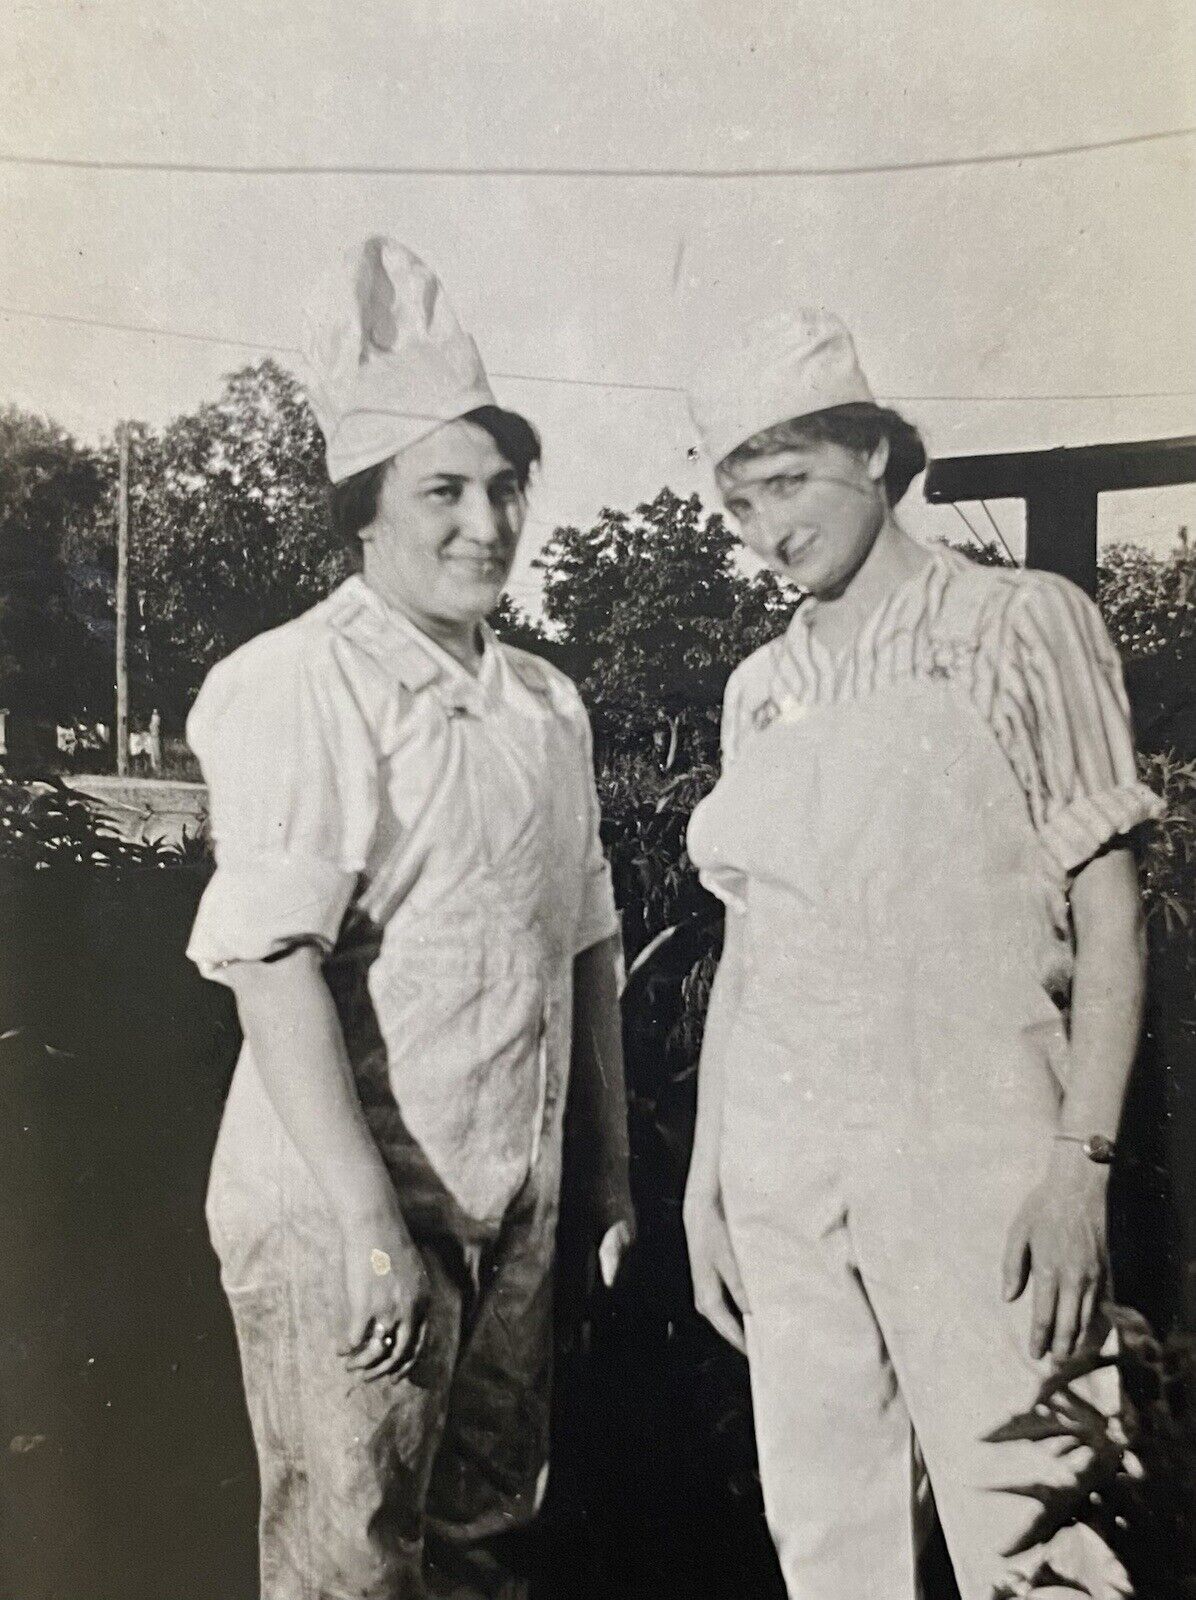 Pretty Young Women in Overalls & Chef Bakers Hats Original Vintage Photo